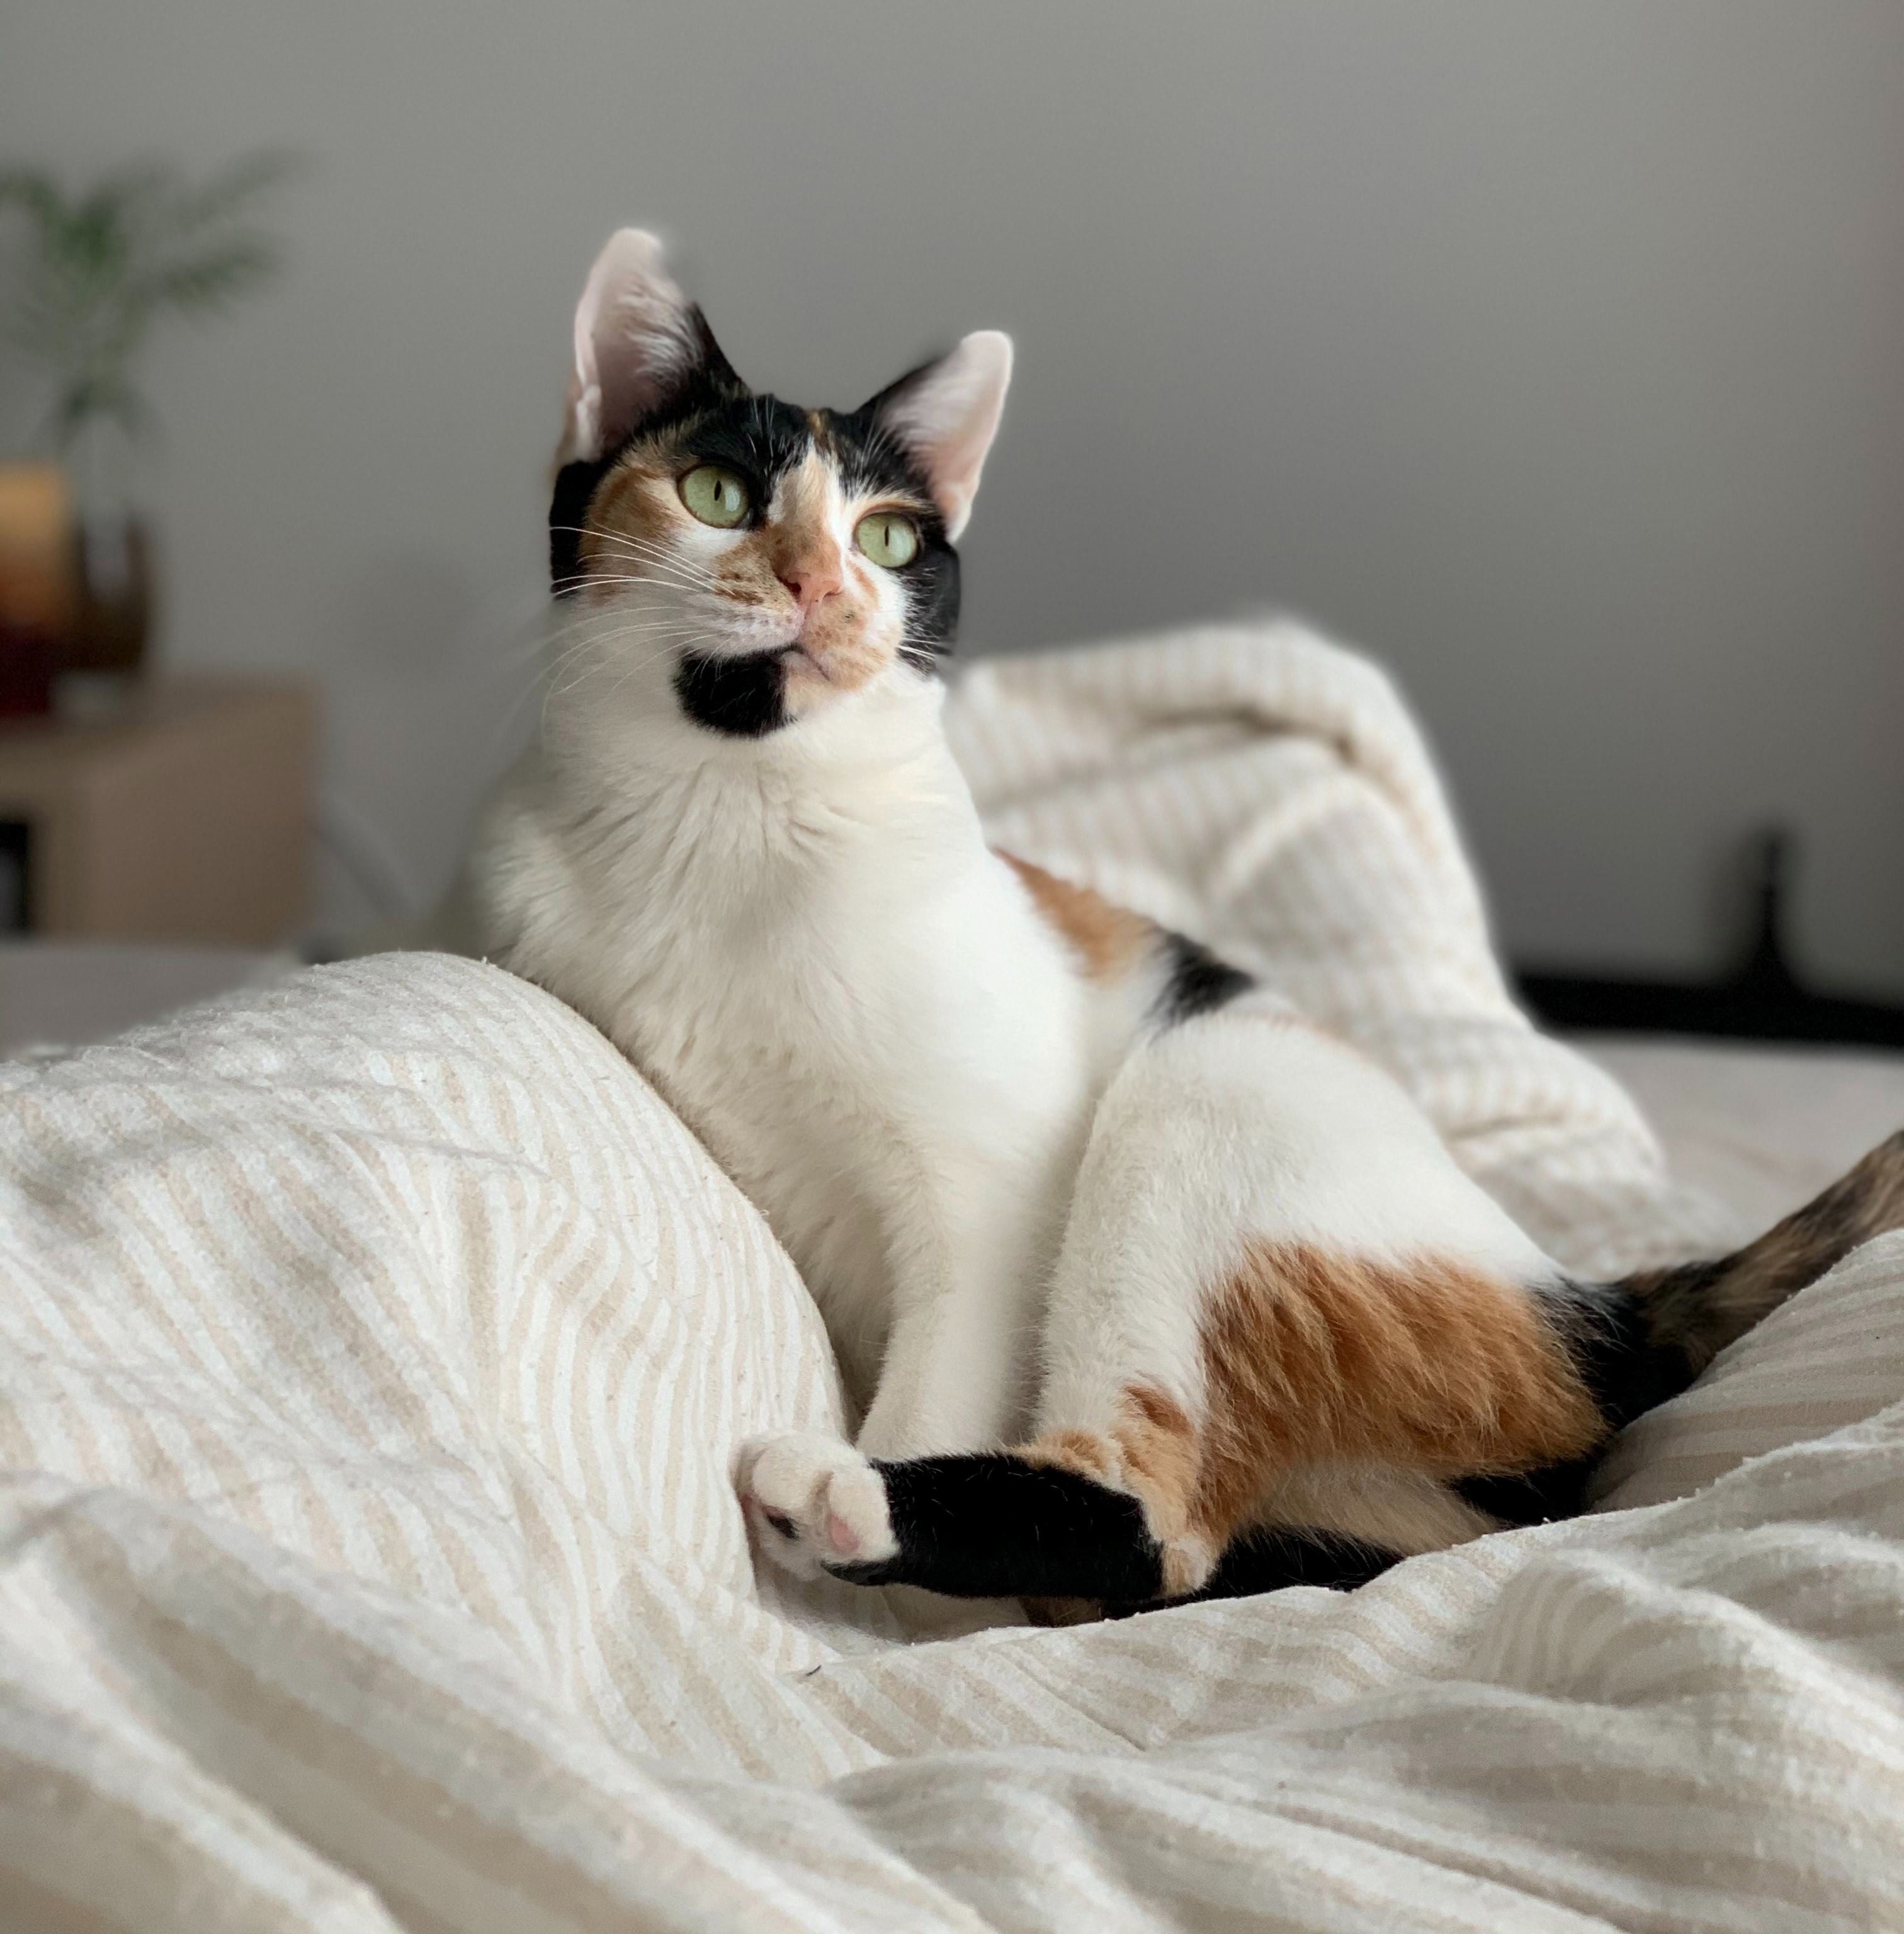  Are essential oils dangerous to cats?